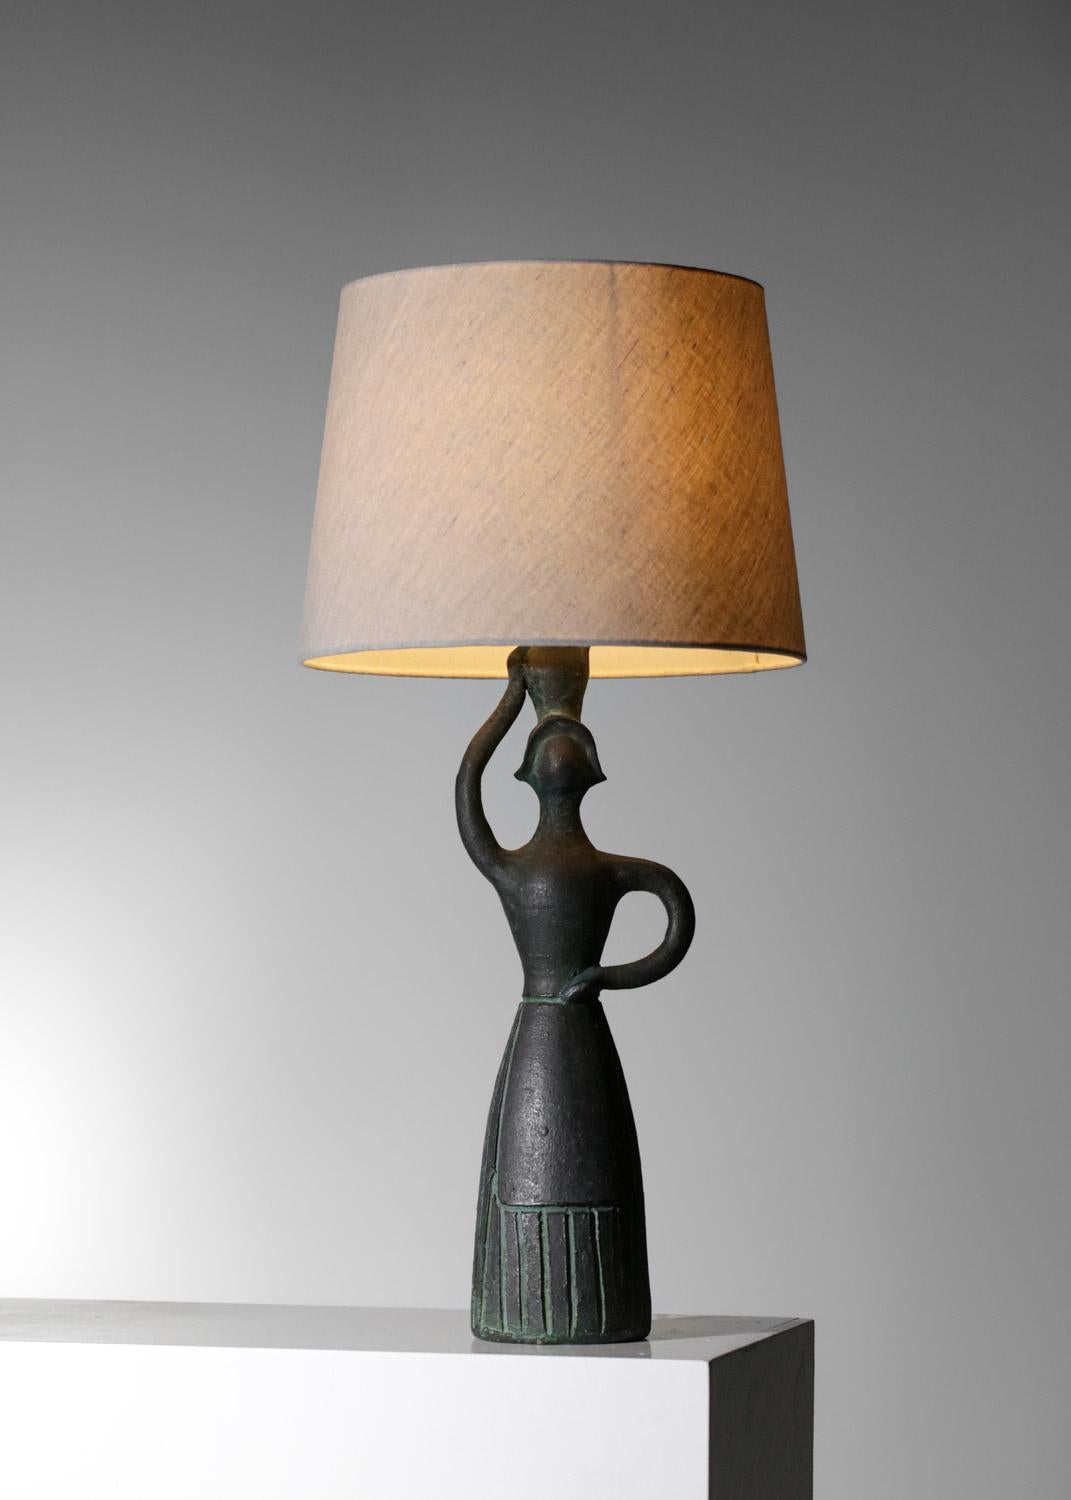 Hand-Carved Large ceramic table lamp attributed to accolay 60s - G633